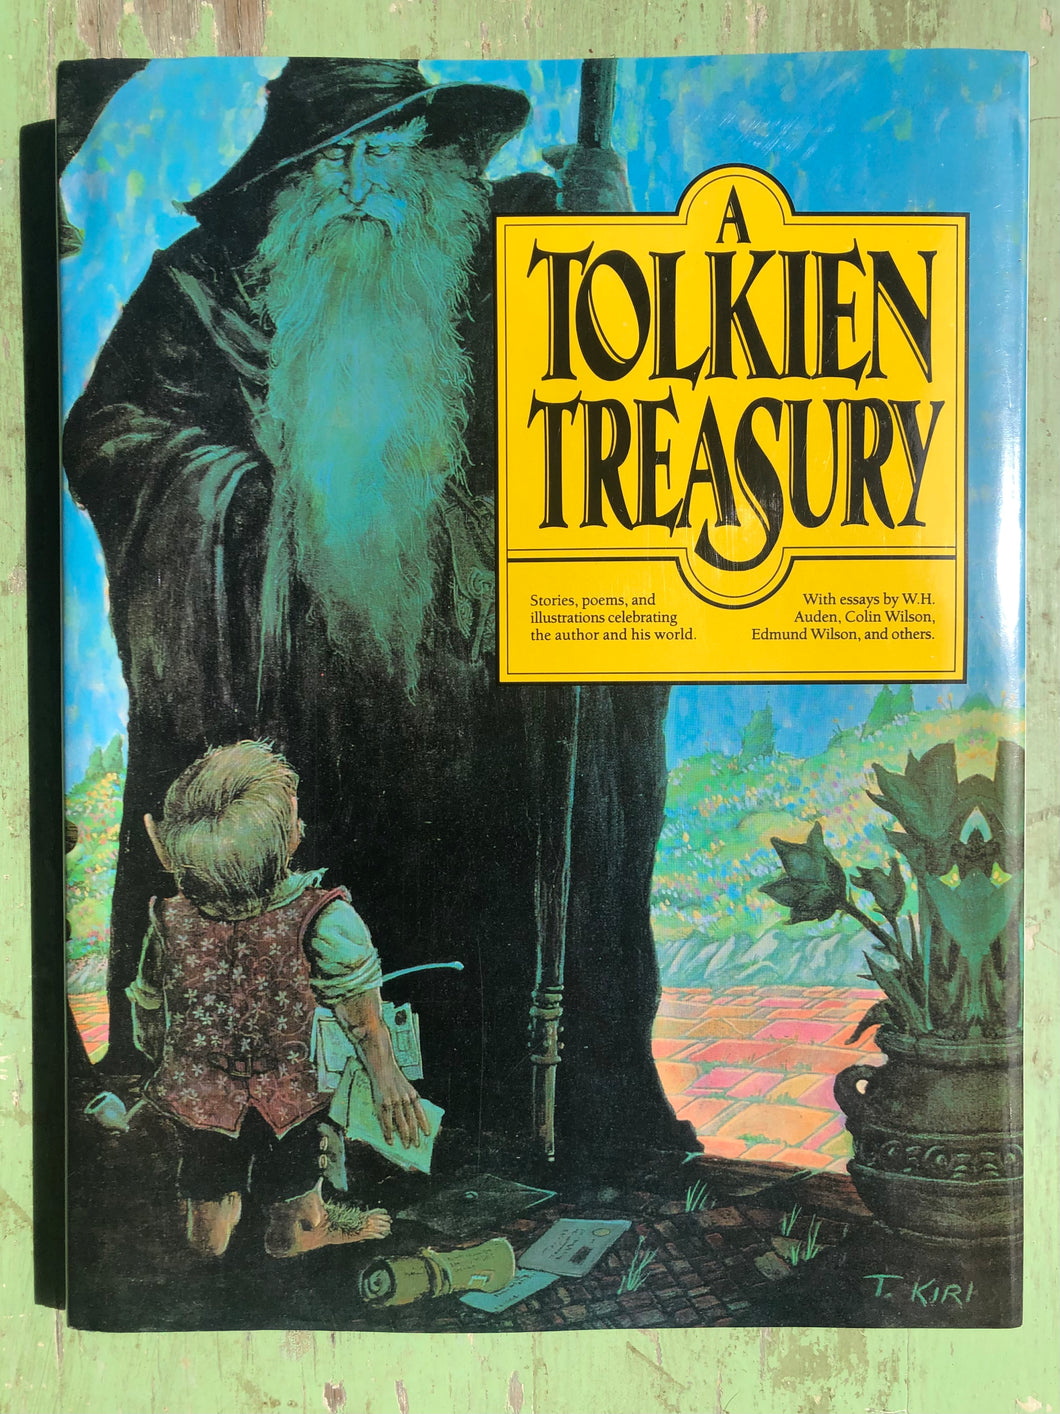 A Tolkien Treasury. Edited by Alida Becker. Illustrations by Michael Green. Color illustrations by Tim Kirk